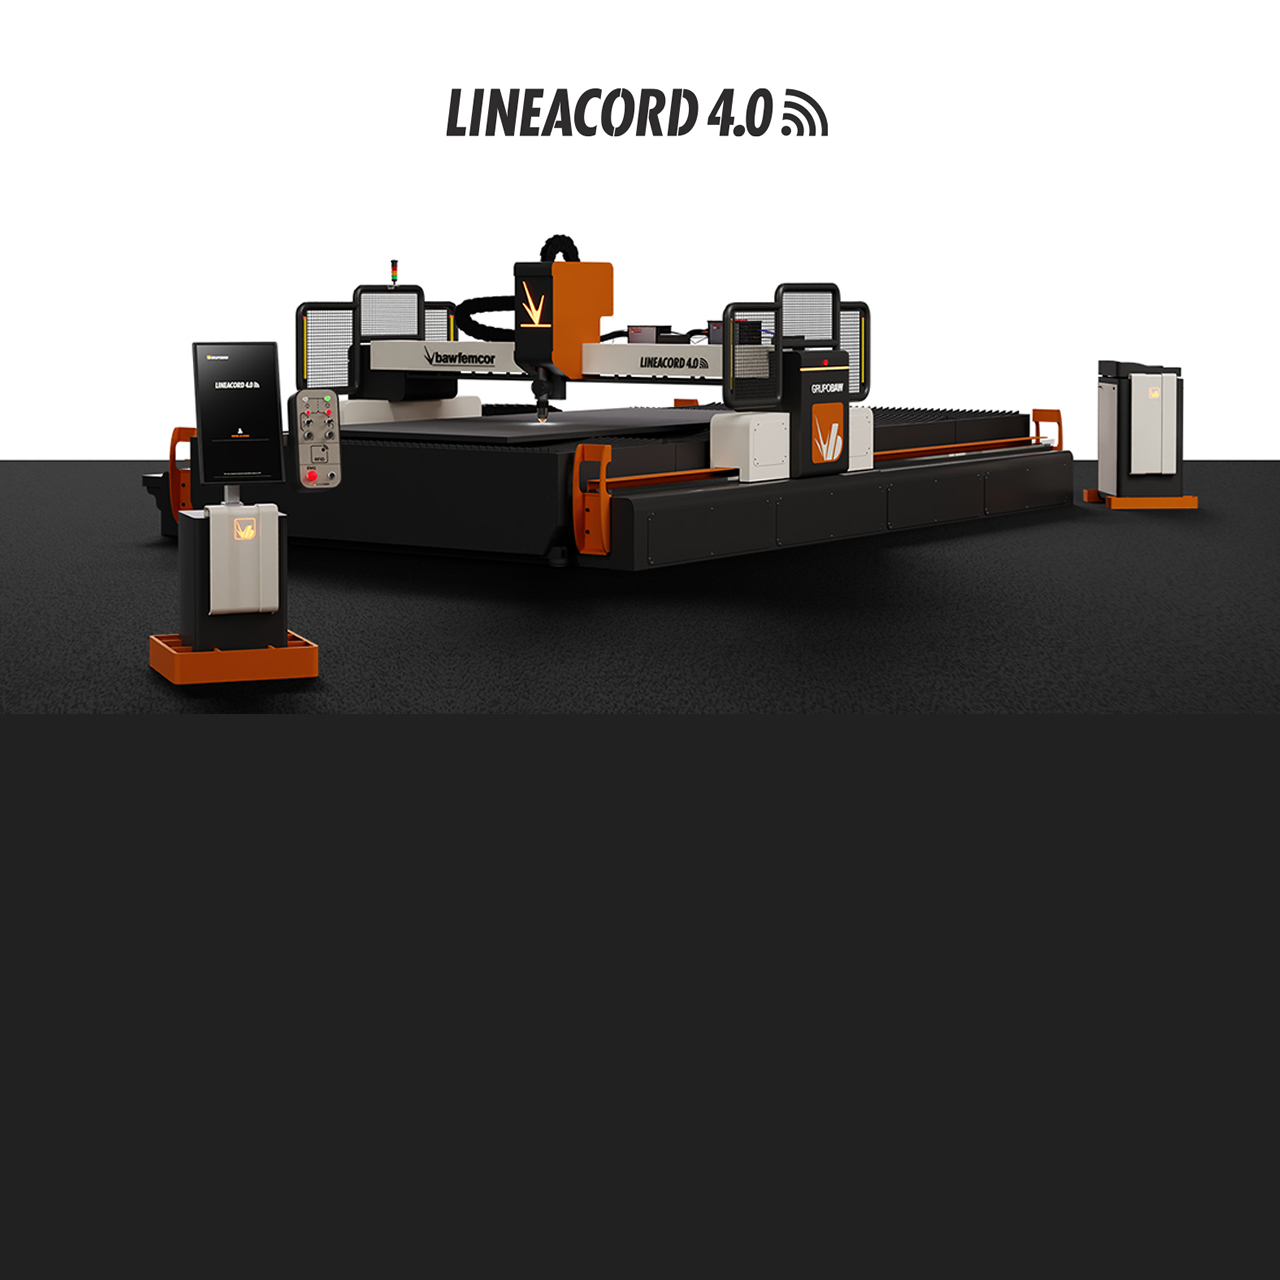 LINEACORD 4.0